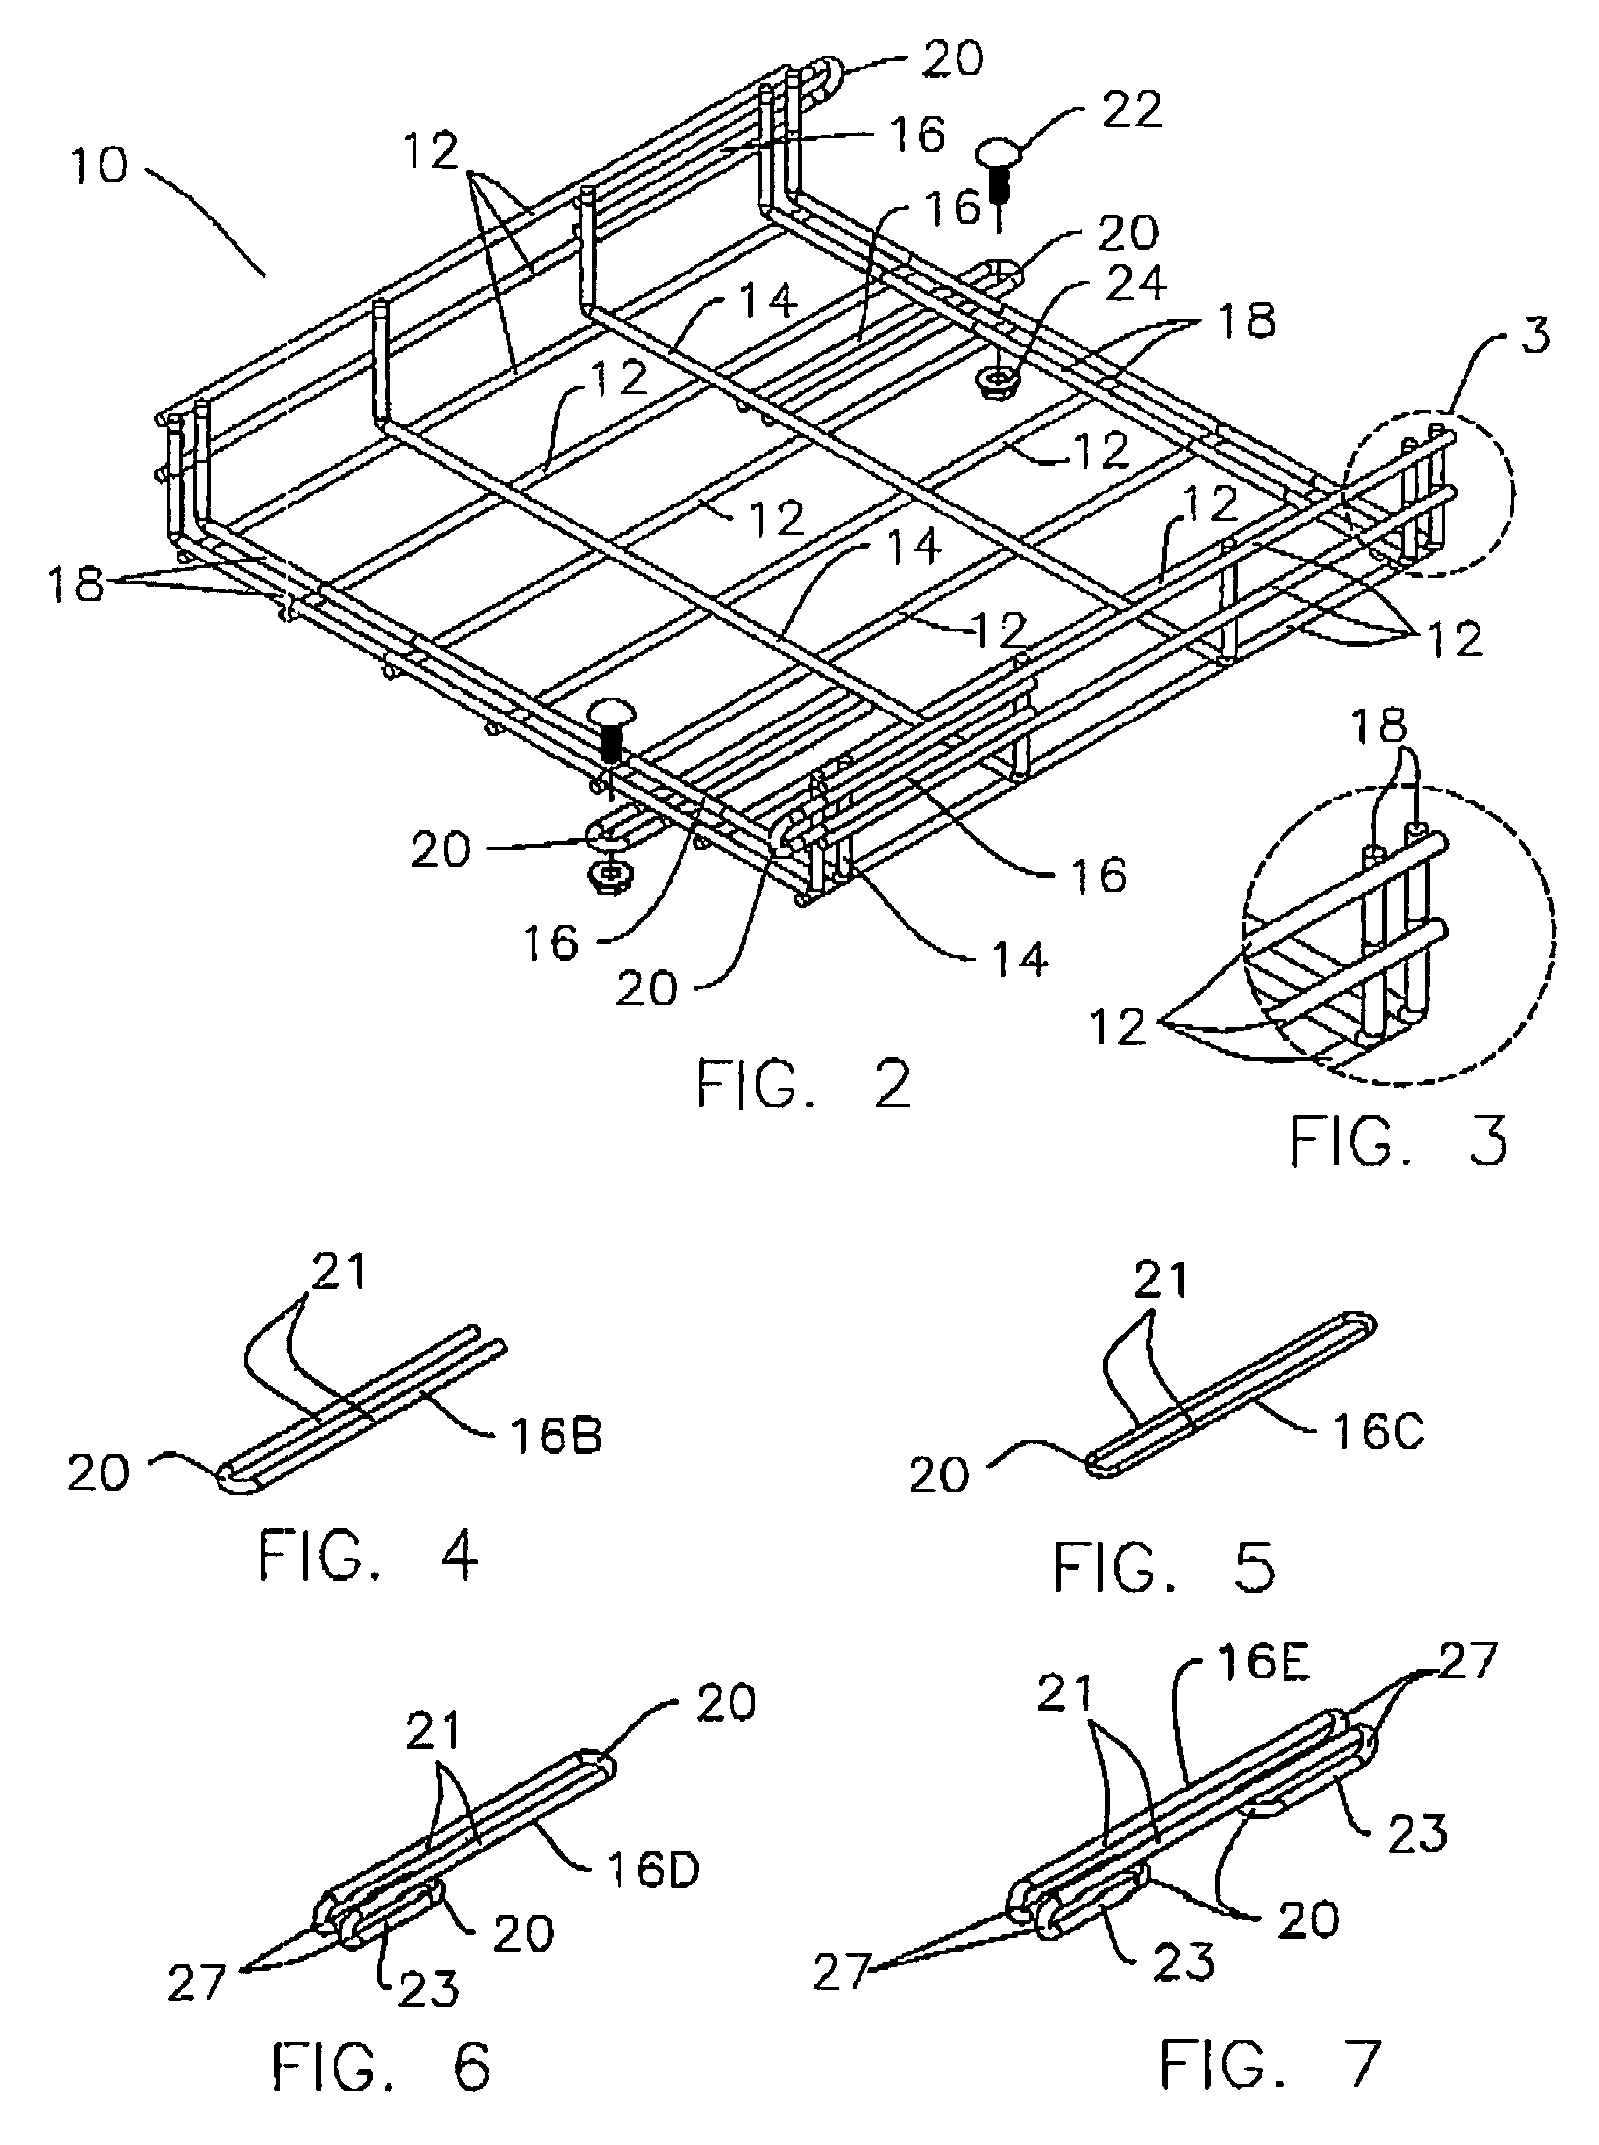 Cable tray assemblies